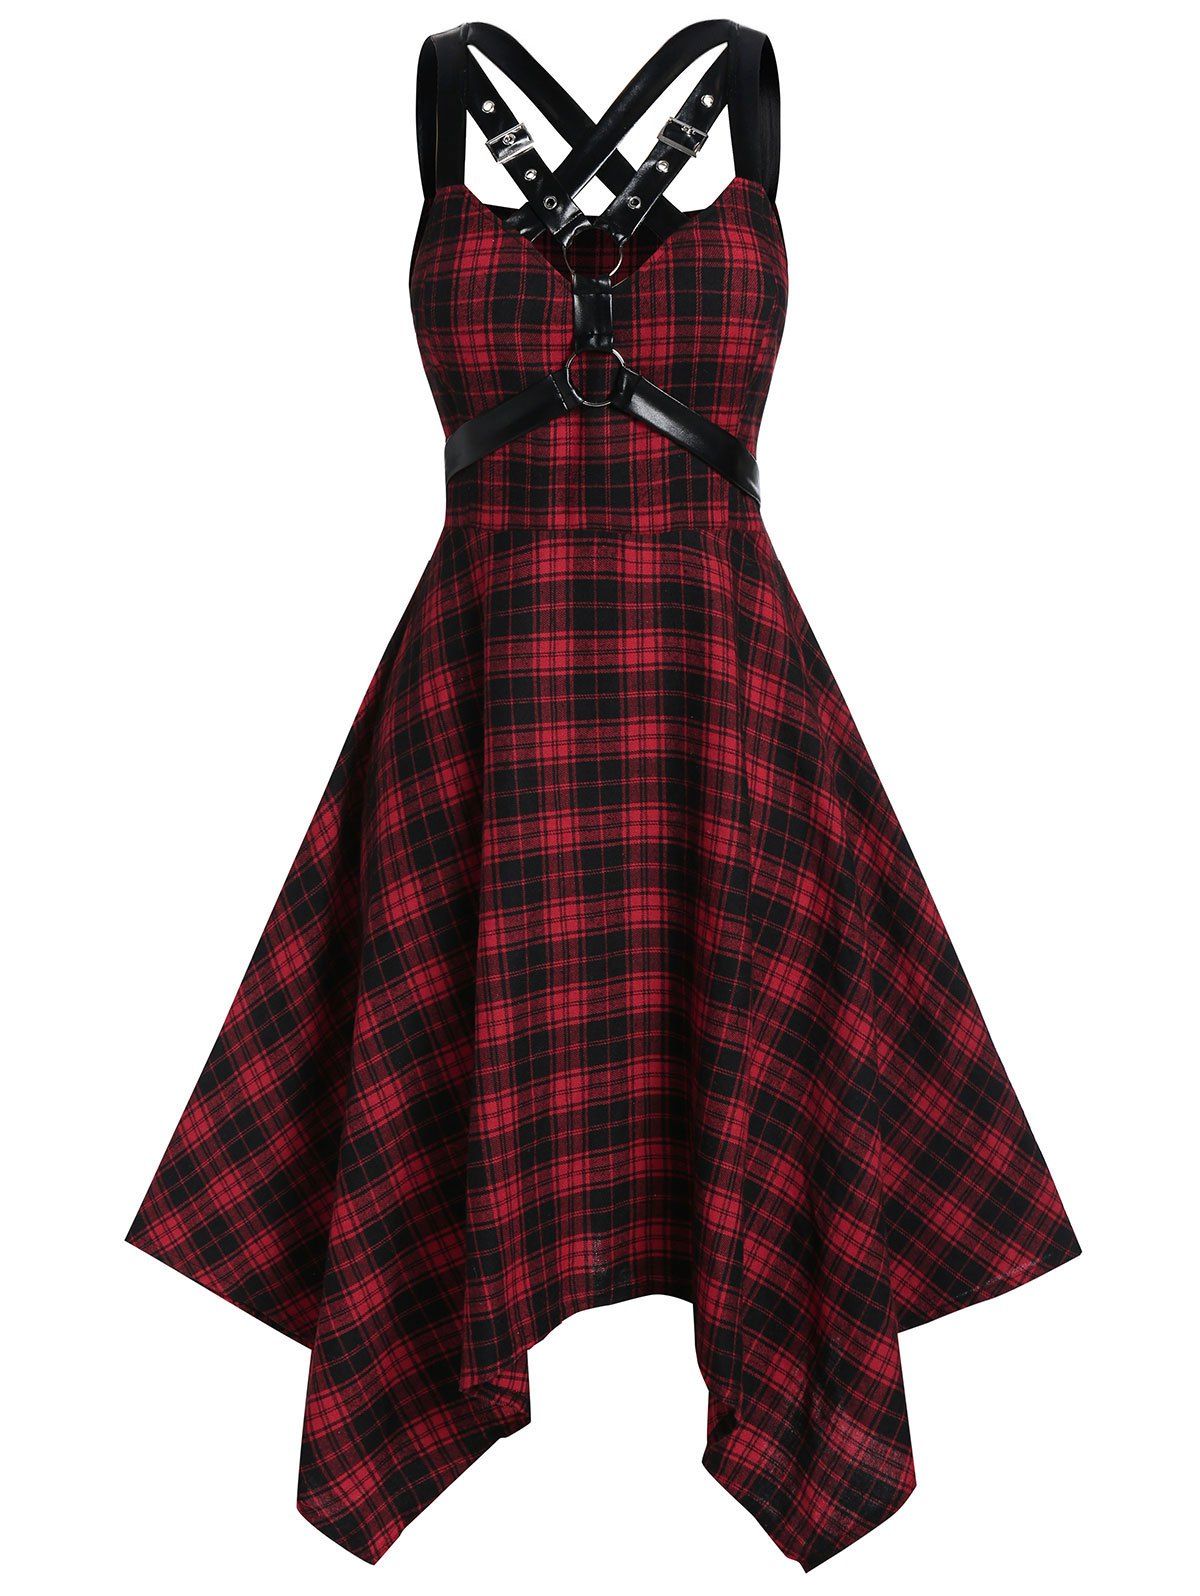 [33% OFF] 2020 Plus Size Plaid Harness Gothic Hanky Hem Dress In RED ...